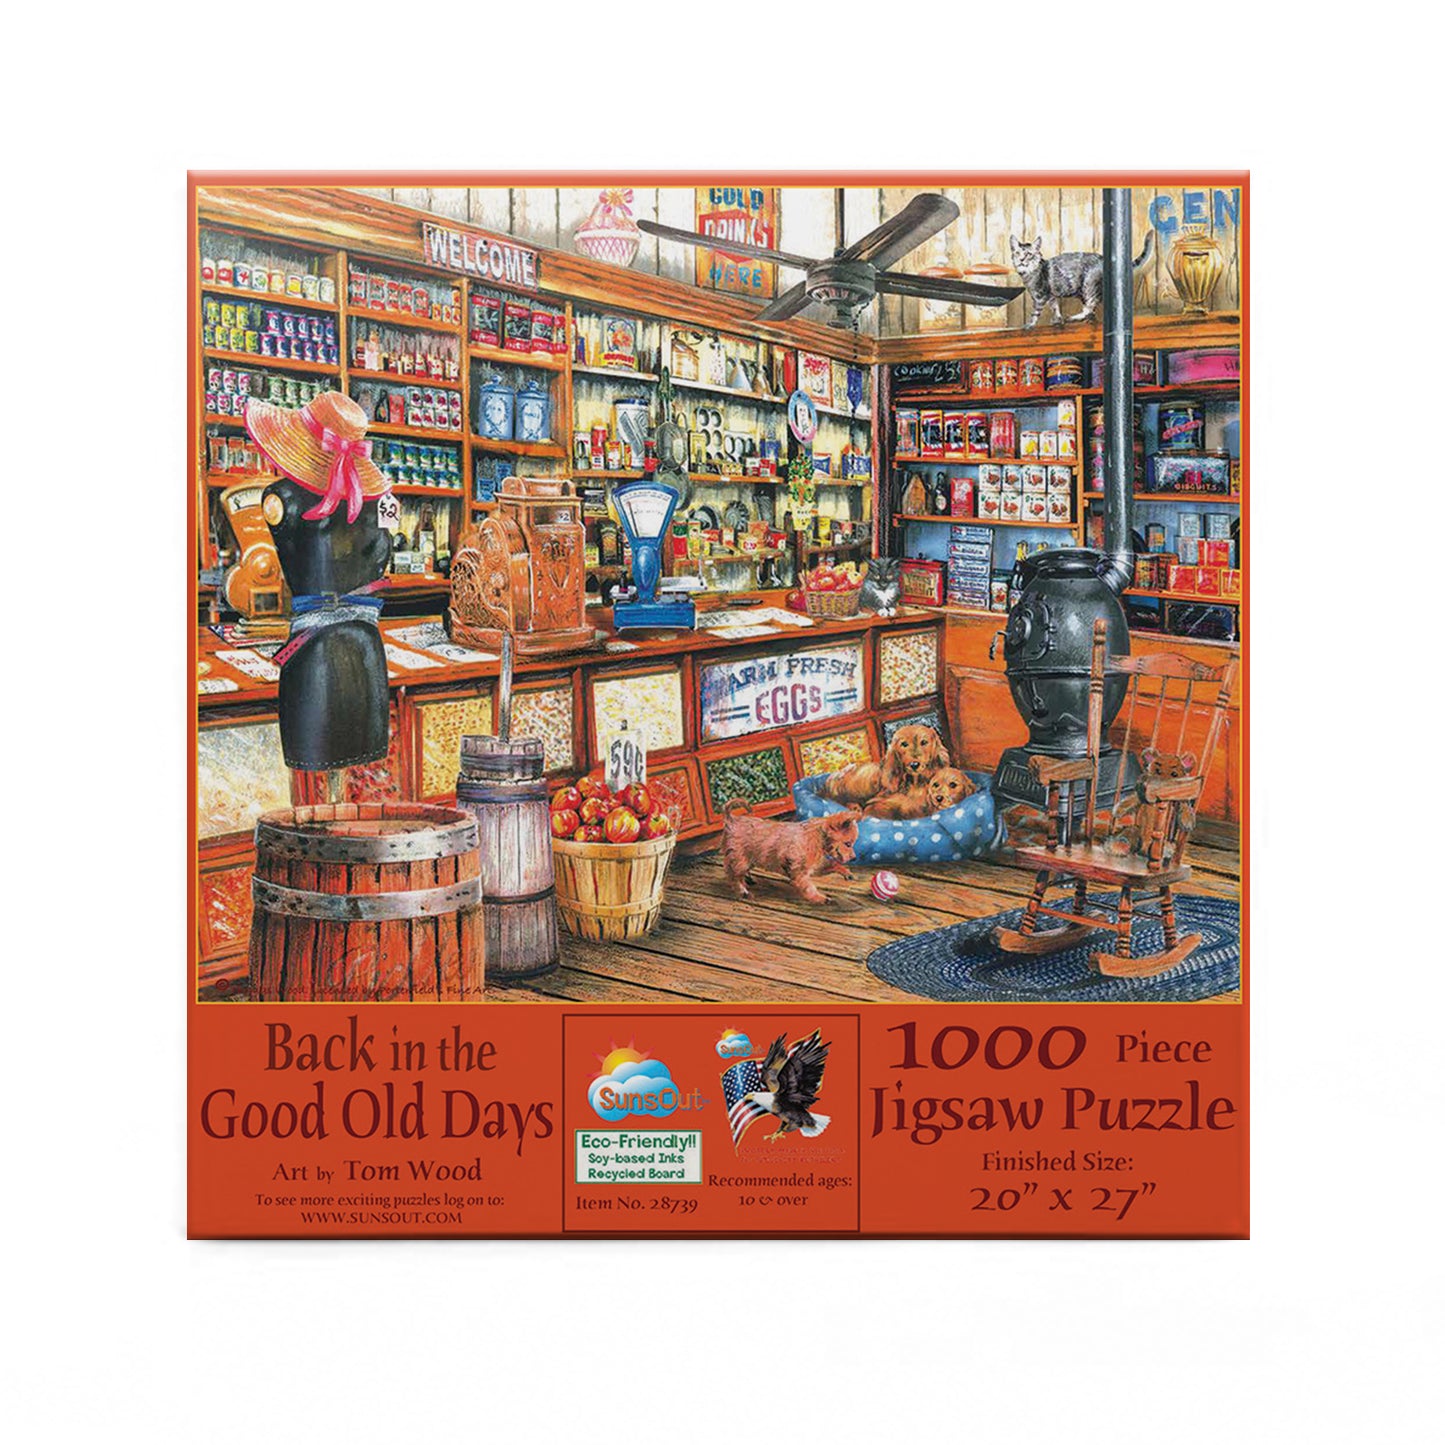 Back in the Good Old Days - 1000 Piece Jigsaw Puzzle